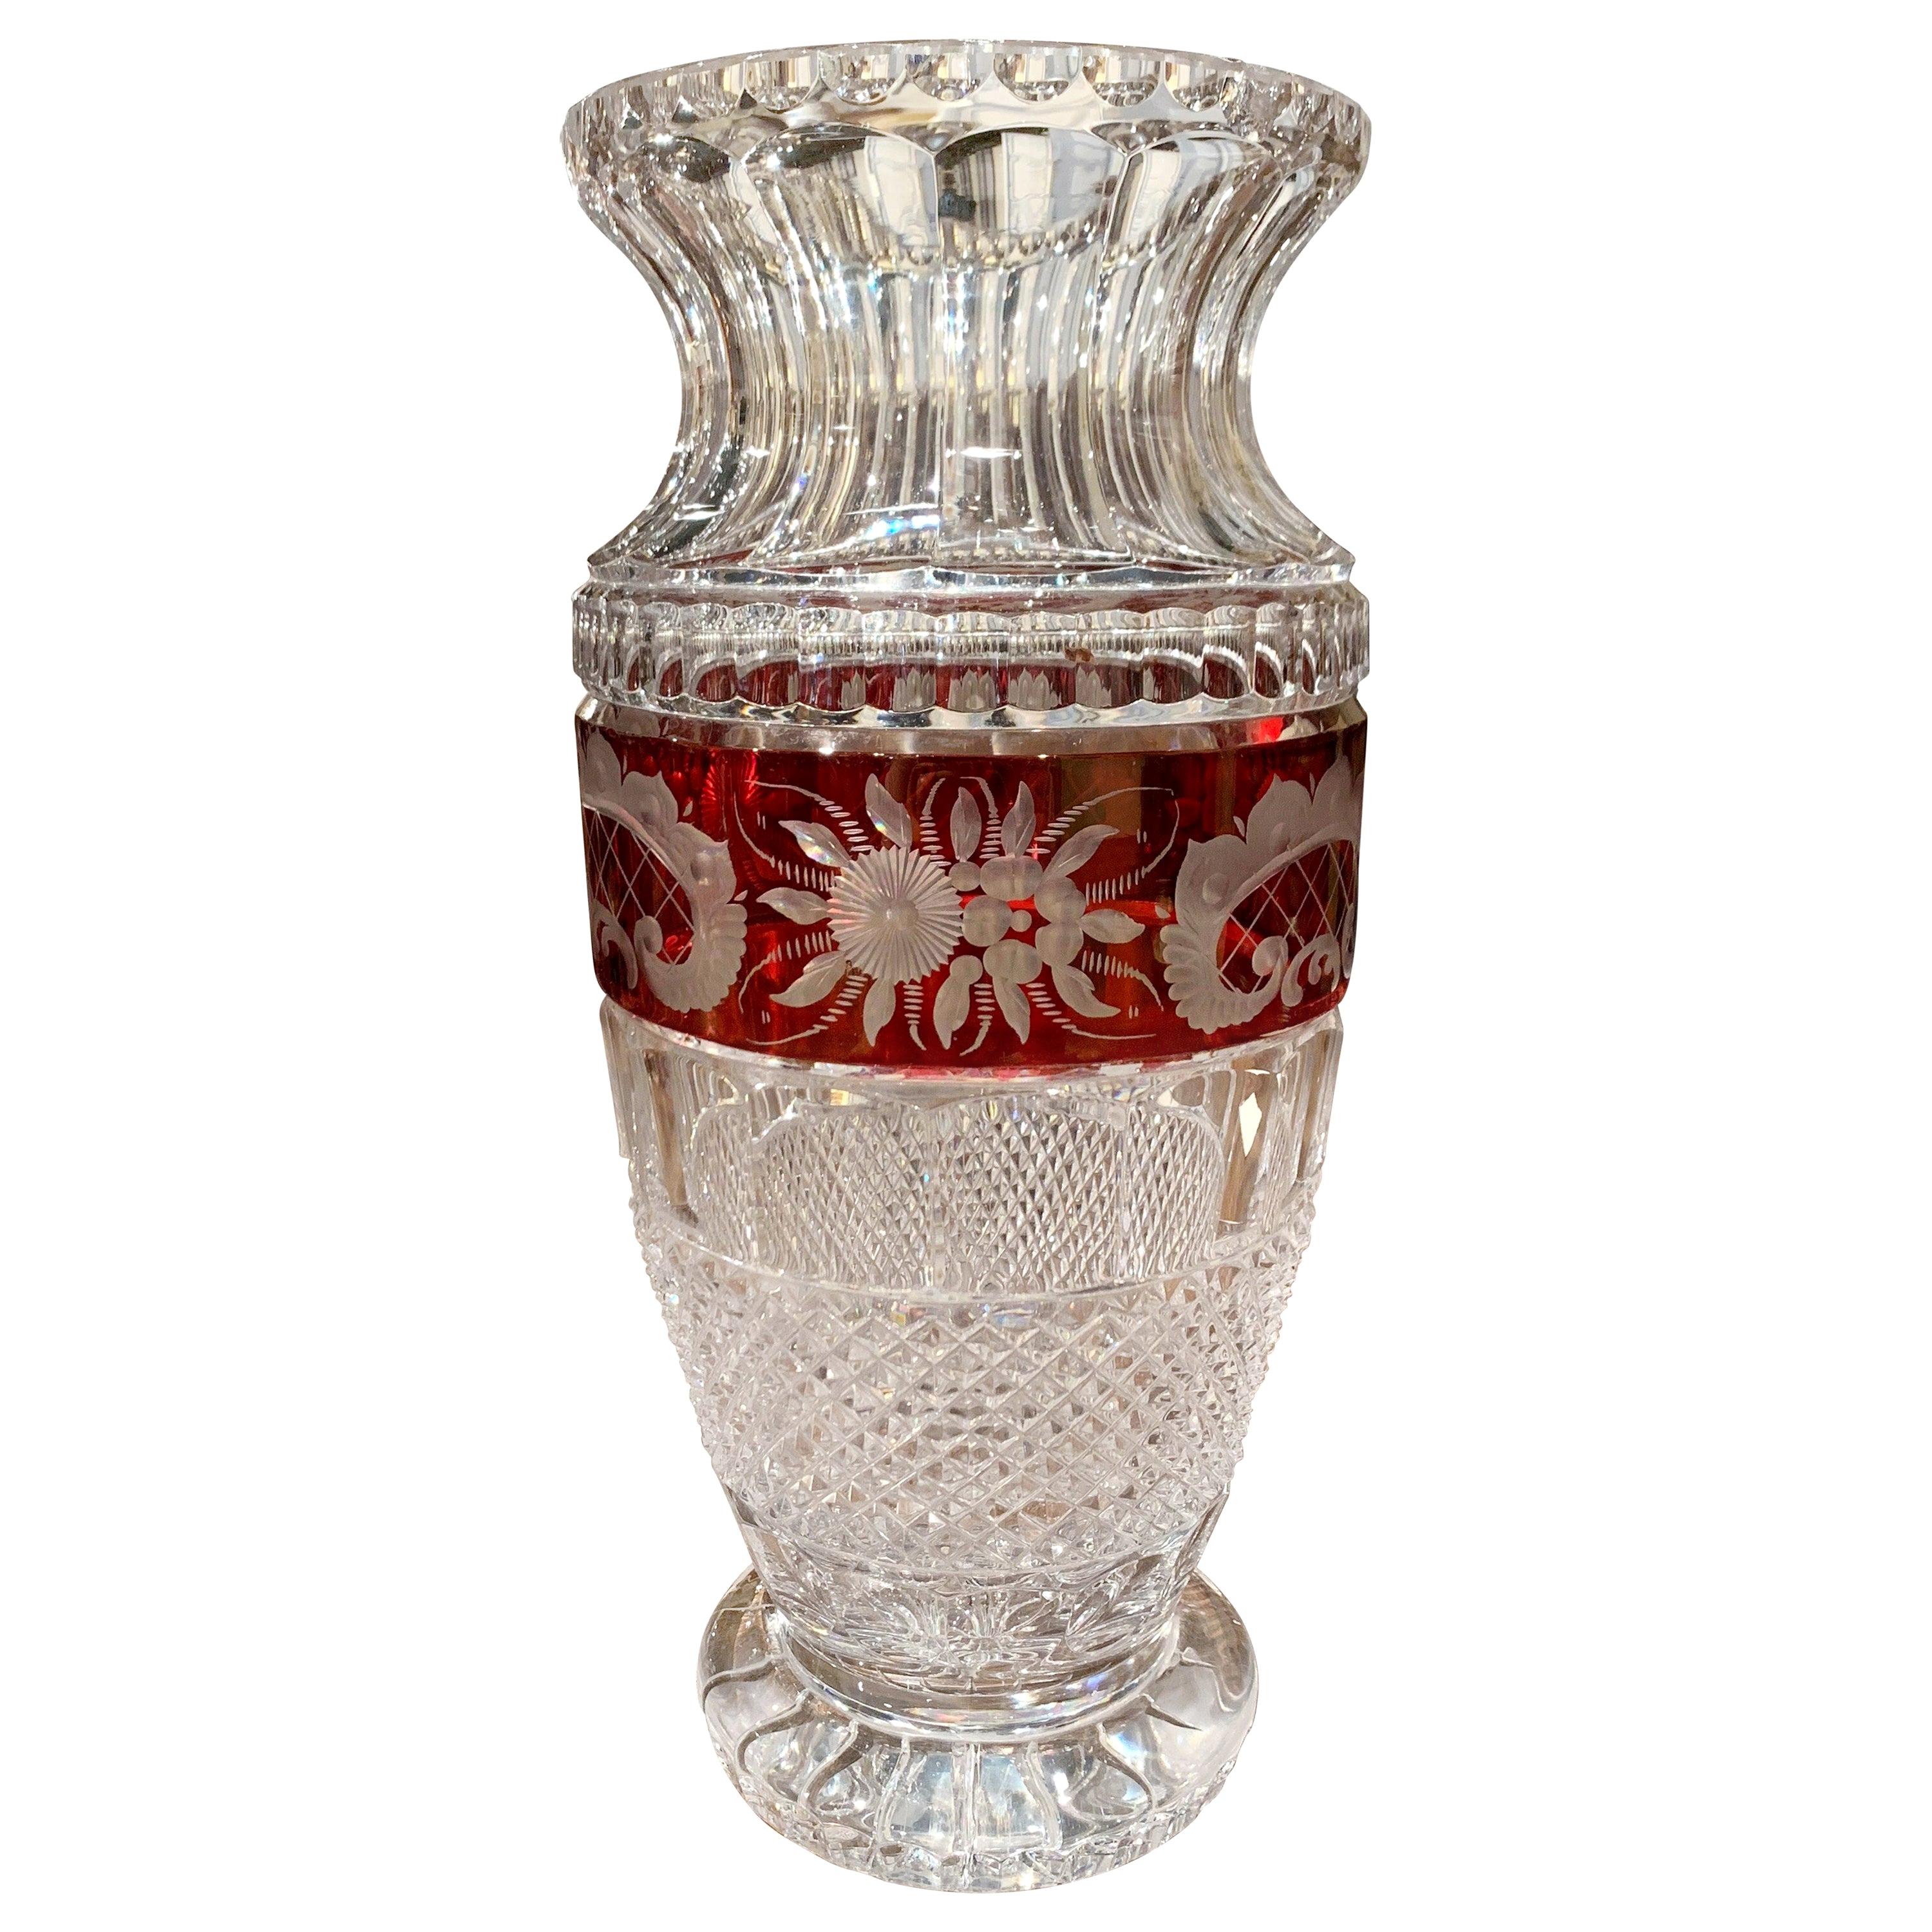 Midcentury French Cut-Glass Vase with Red Floral Motifs Saint Louis Style